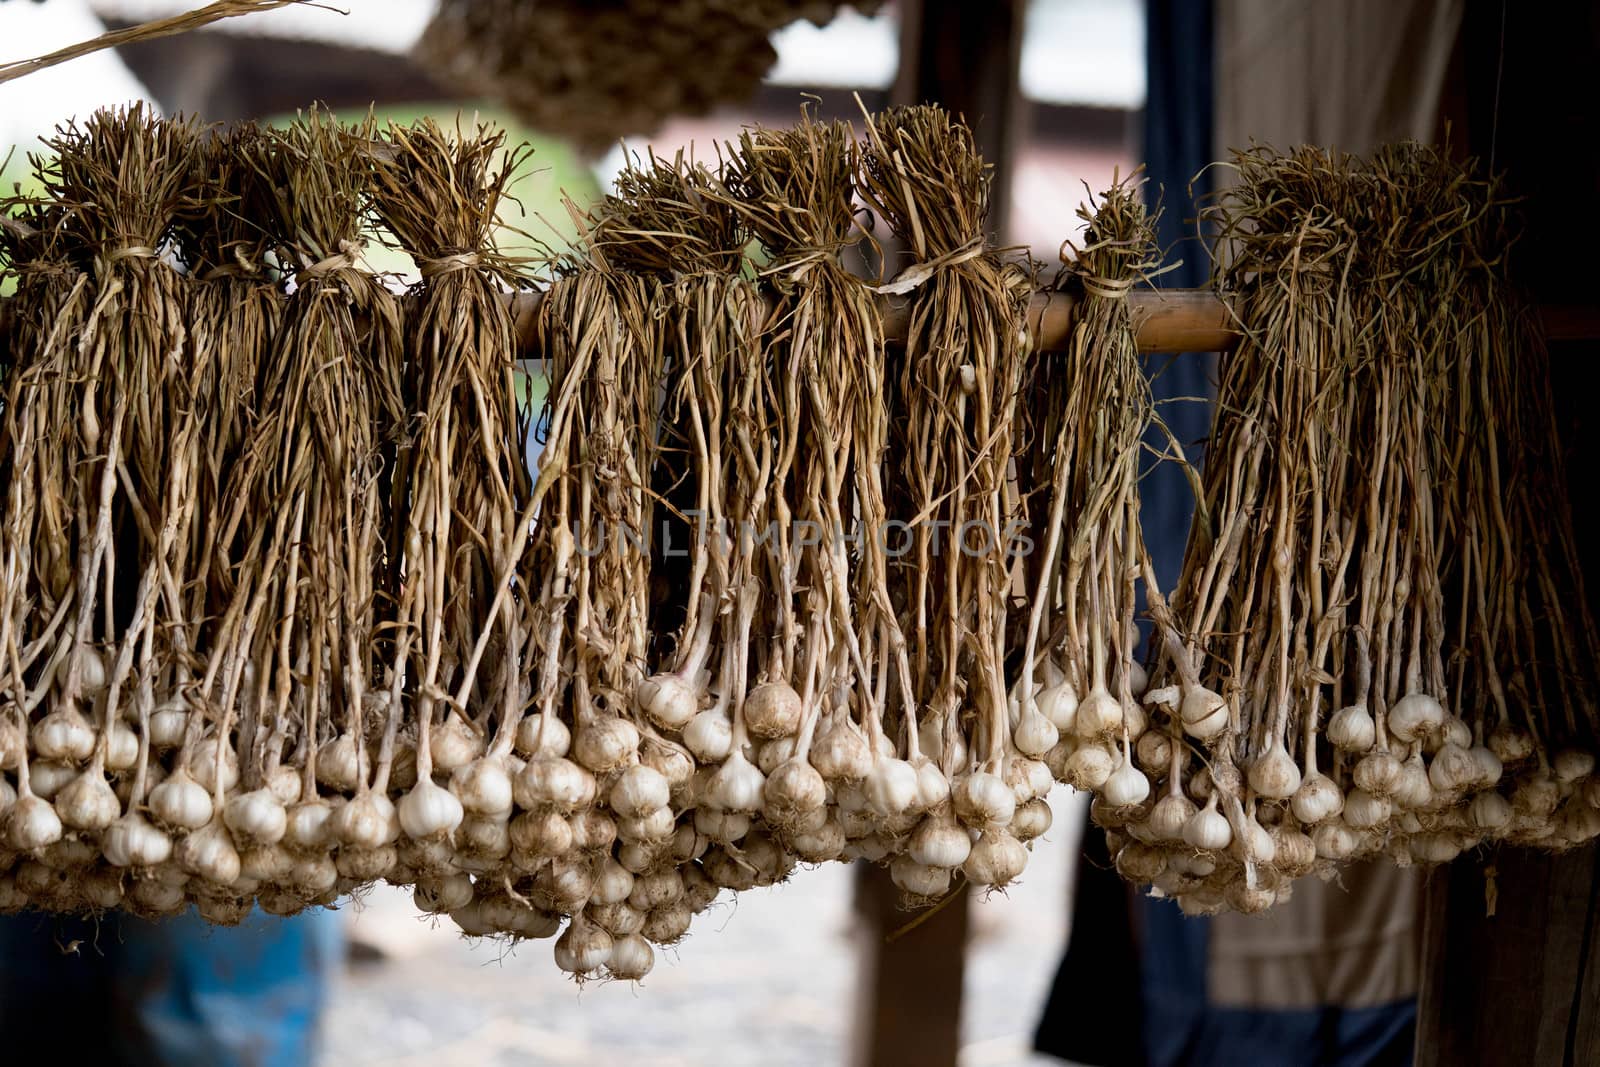 Garlic is tied up to be ready for distribution to the customer o by sakchaineung